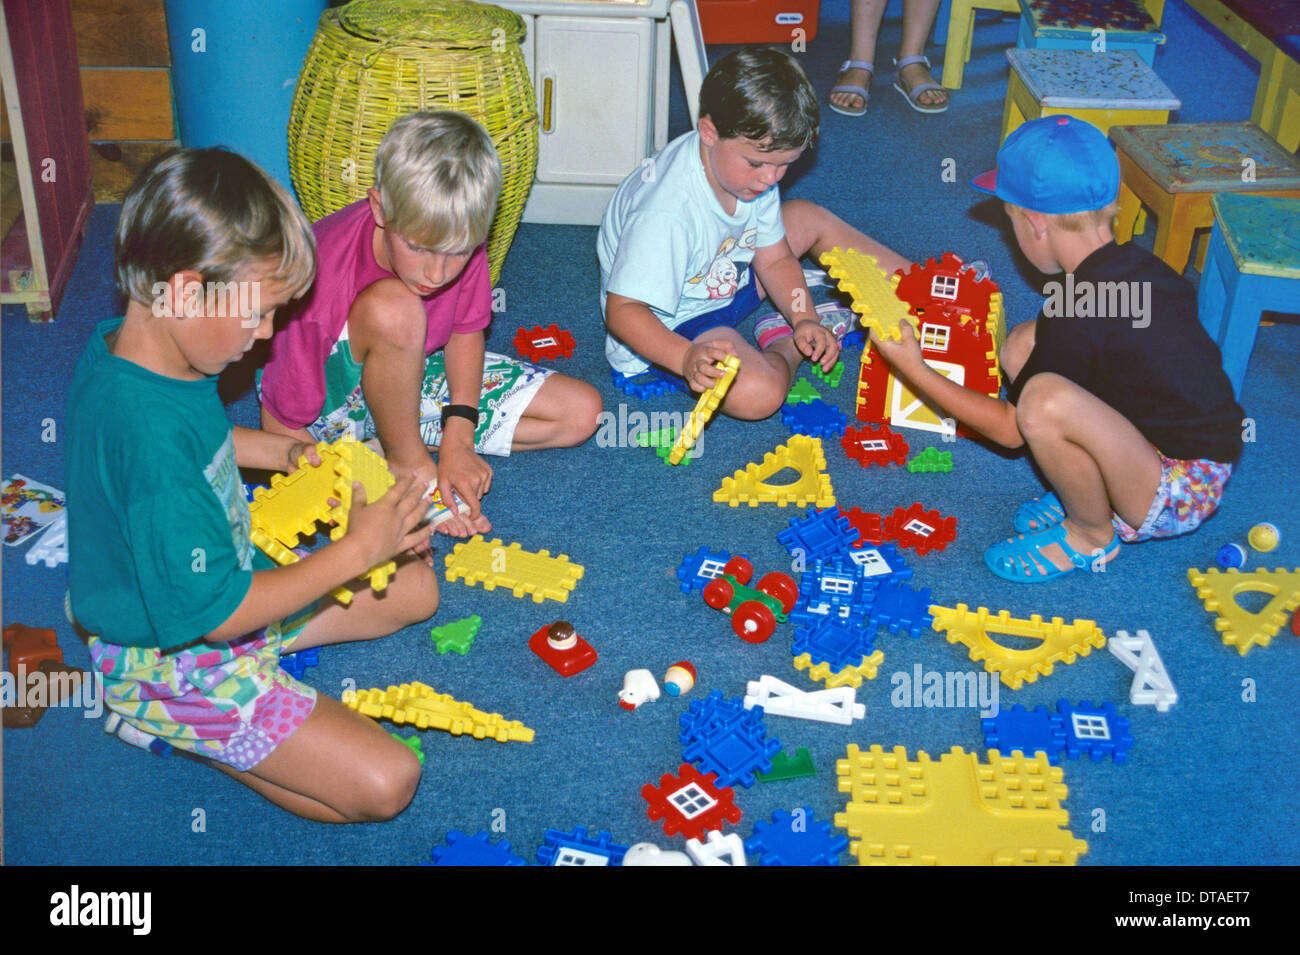 Boys Seven-to-Nine Years Old Playing or Using Construction Blocks, Lego or Building Model Toys in School Stock Photo